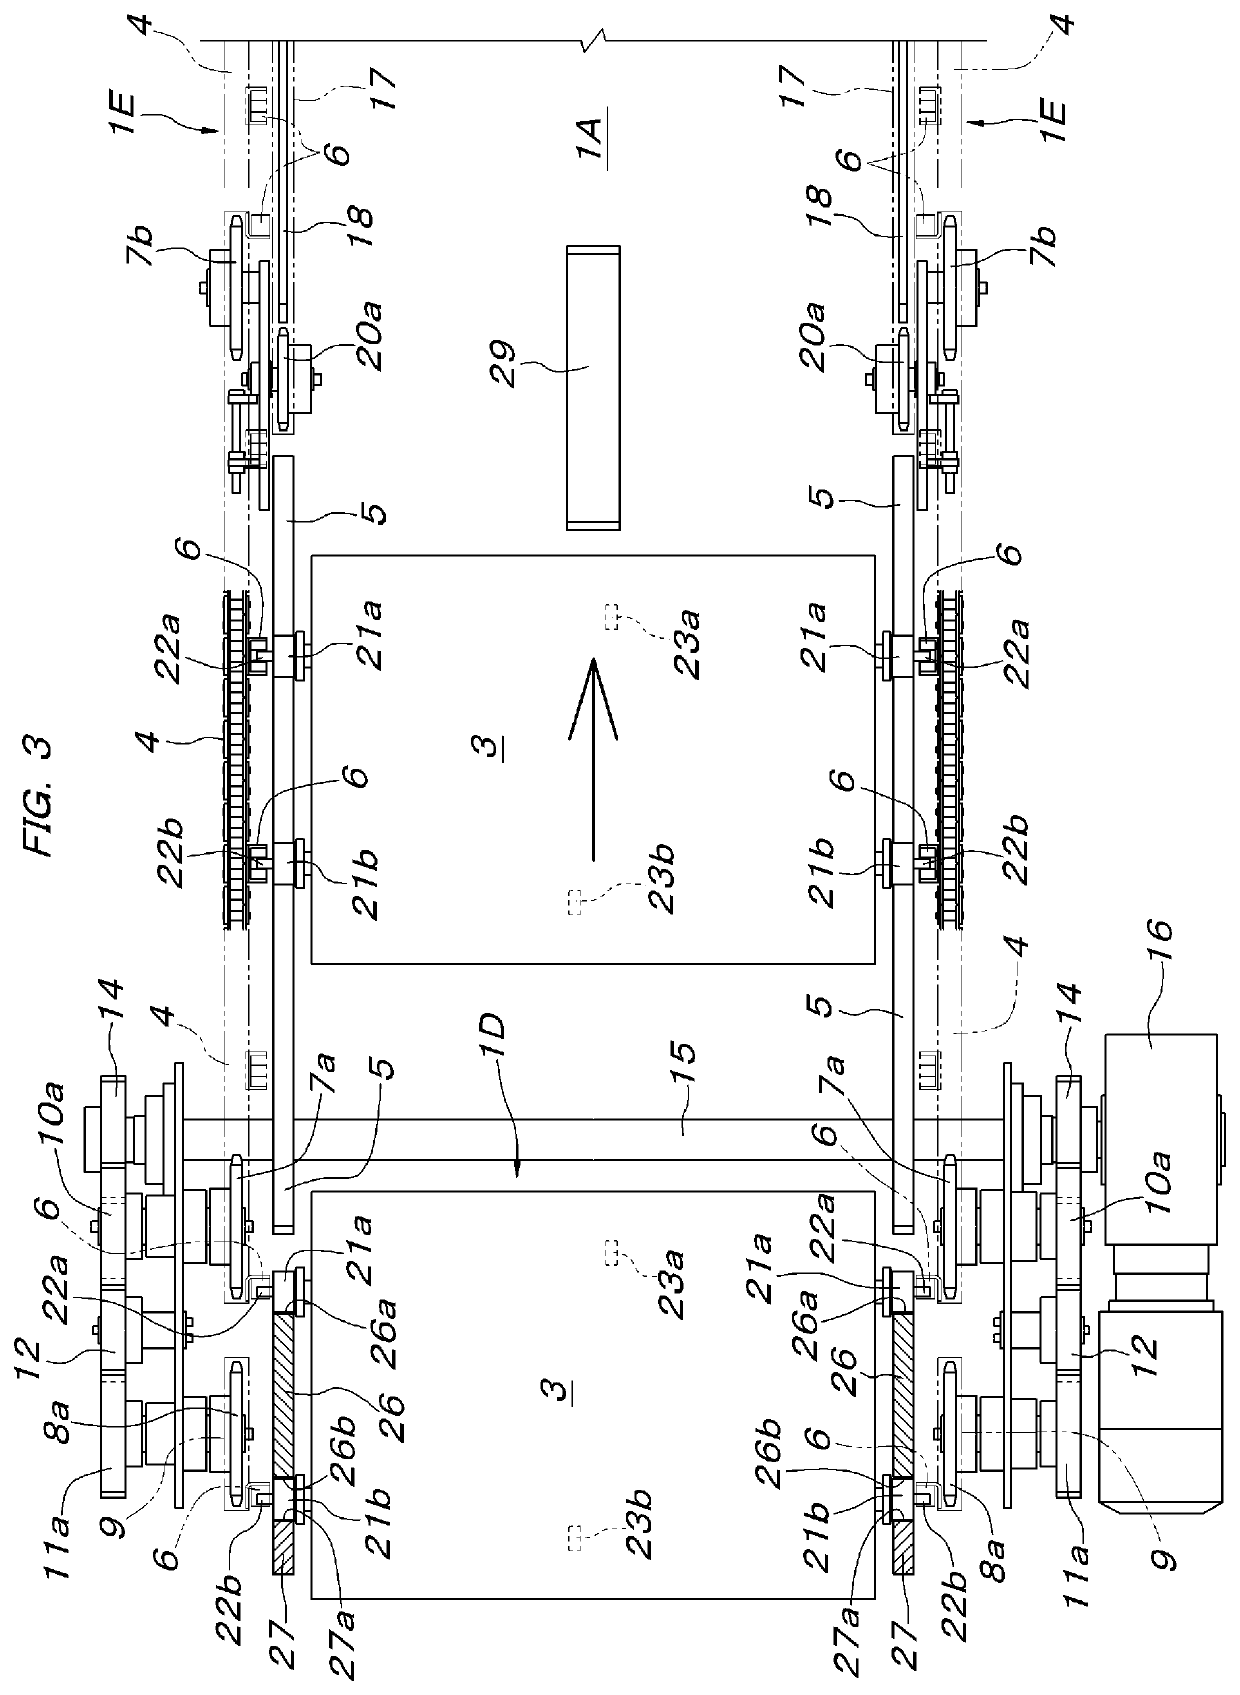 Conveyance device using carriage